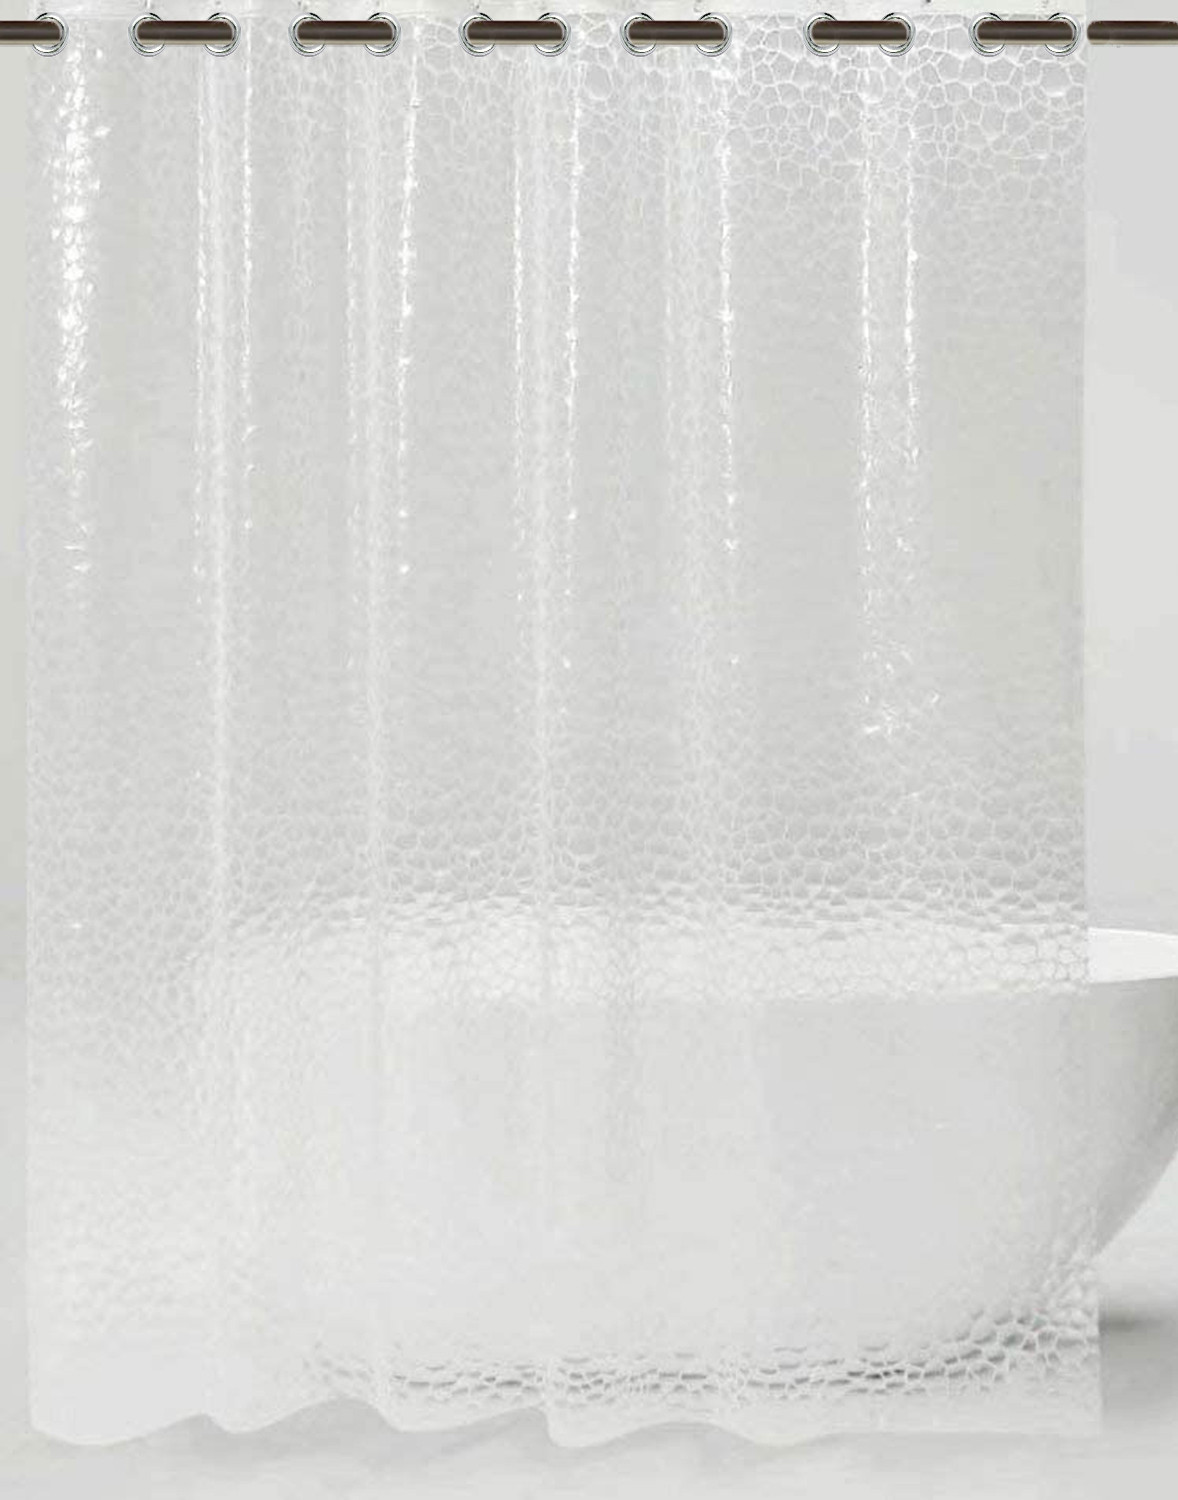 Kuber Industries 0.20mm 3D Stain Resistant, No Odor Clear Waterproof PVC AC Shower Curtain With Eyelets,9 Feet (Transparent)-HS_38_KUBMART21309